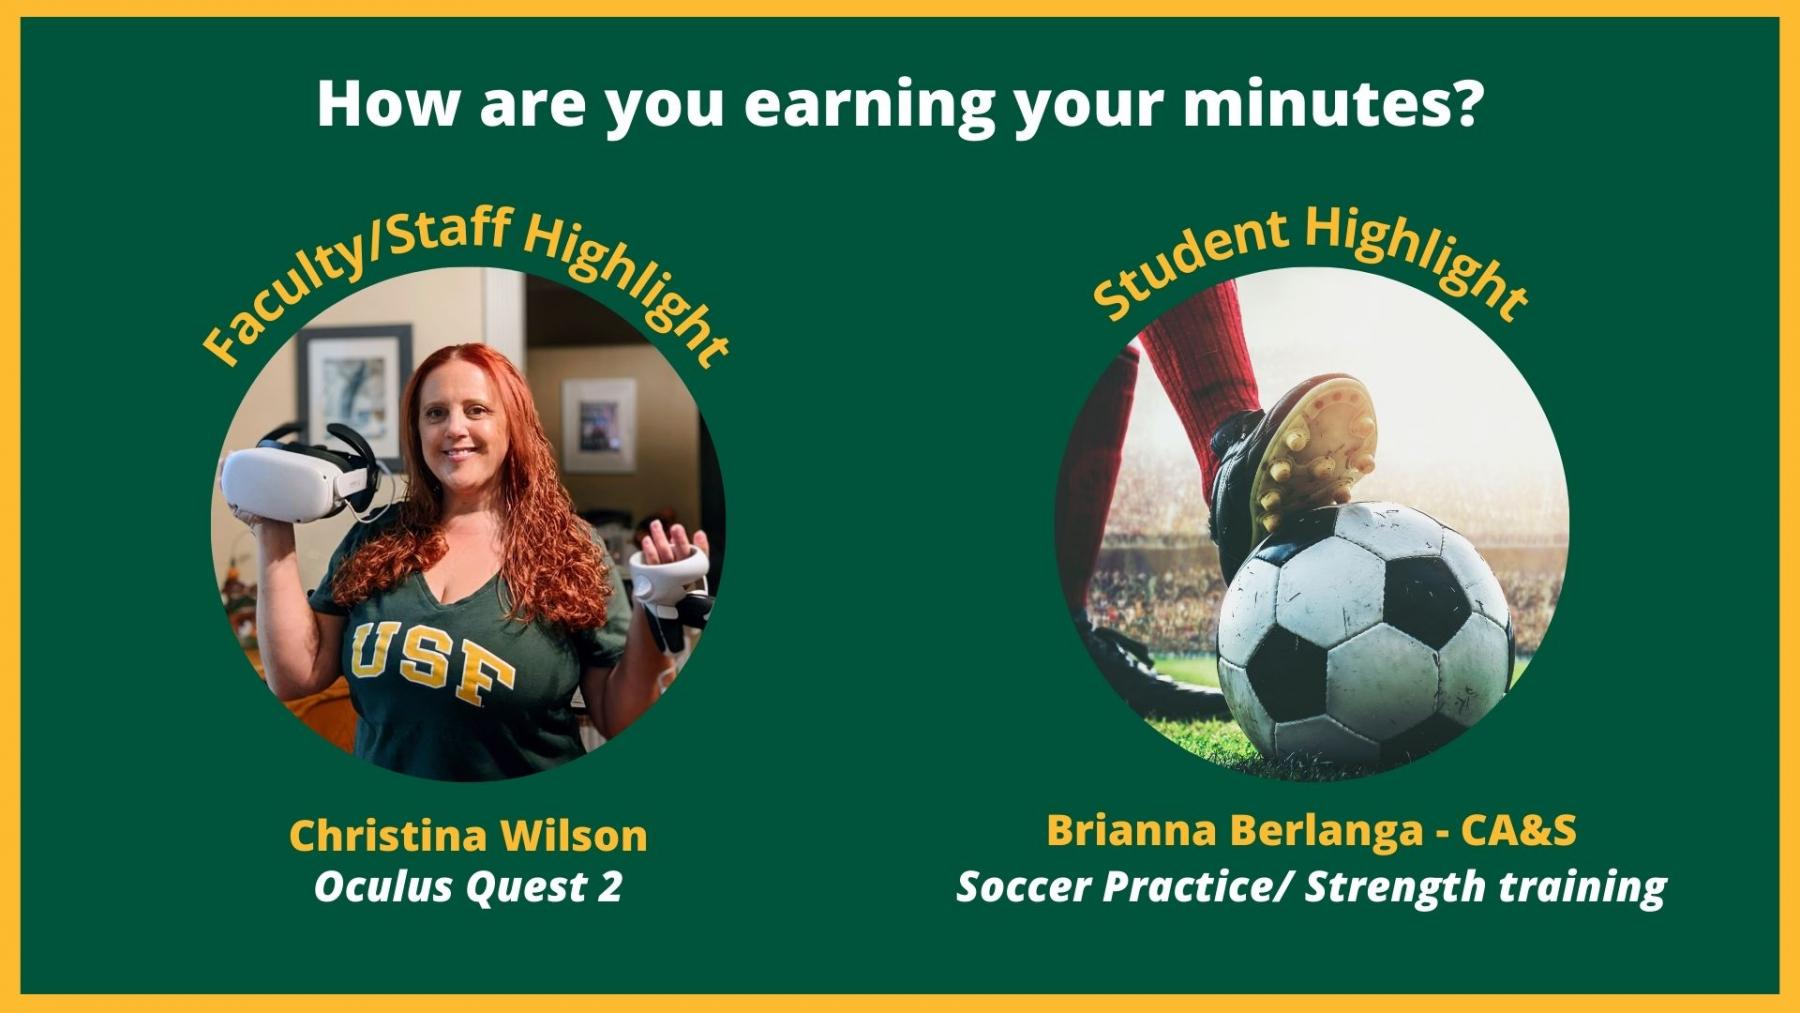 Faculty/staff and student highlighted for how they are earning their minutes